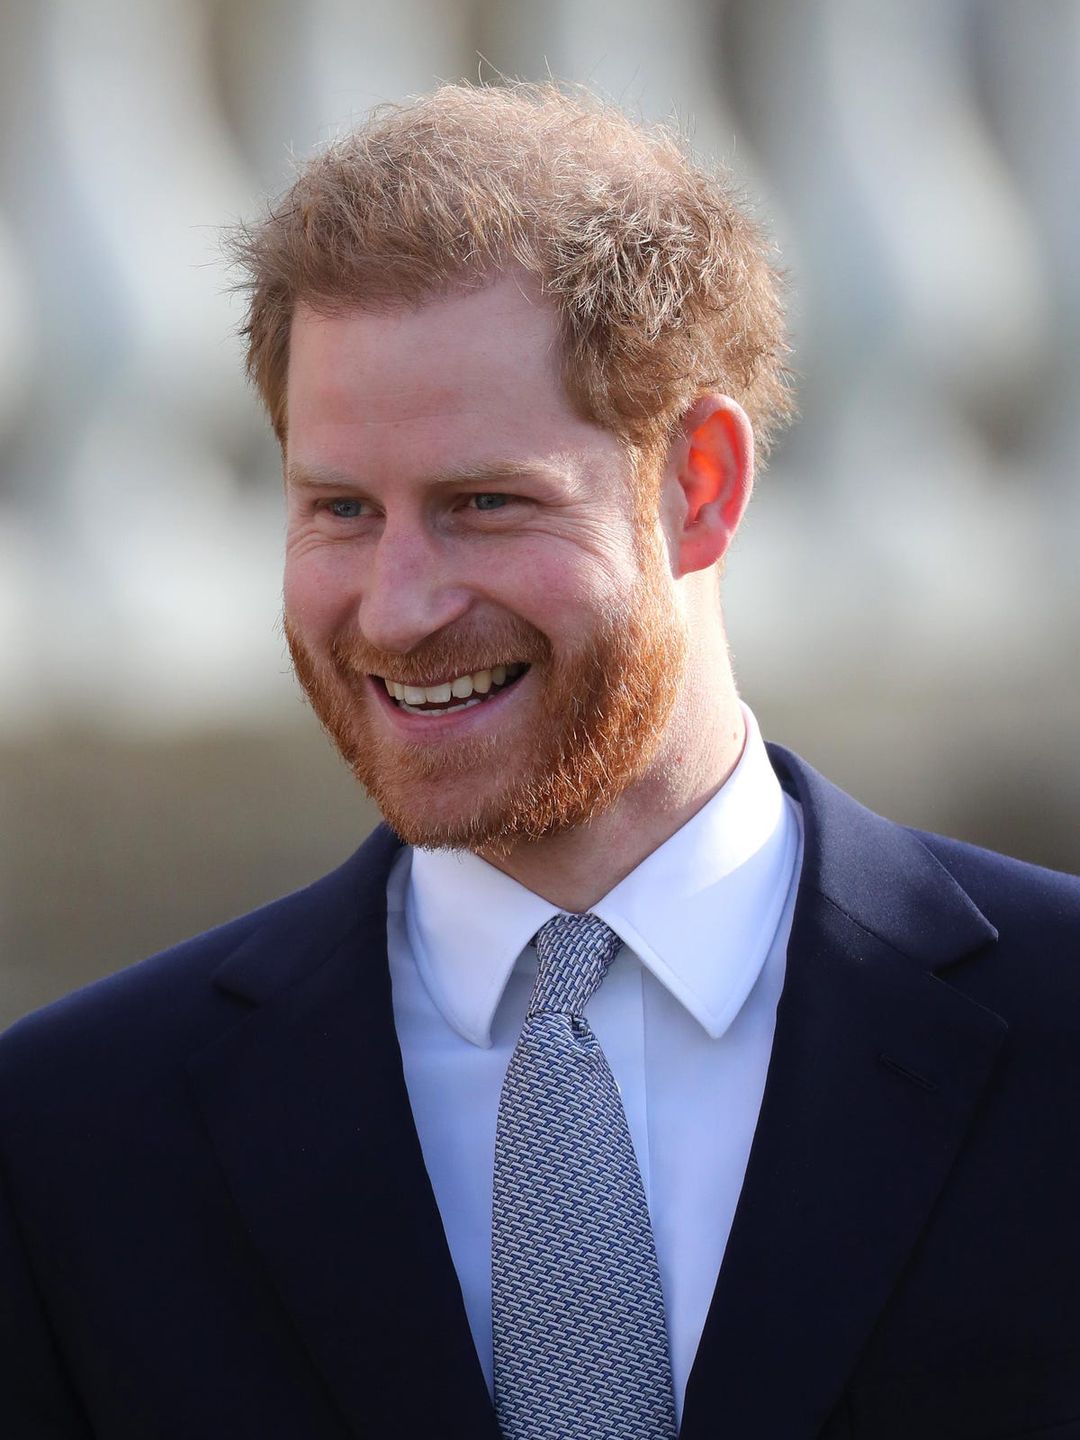 Prince Harry interesting facts